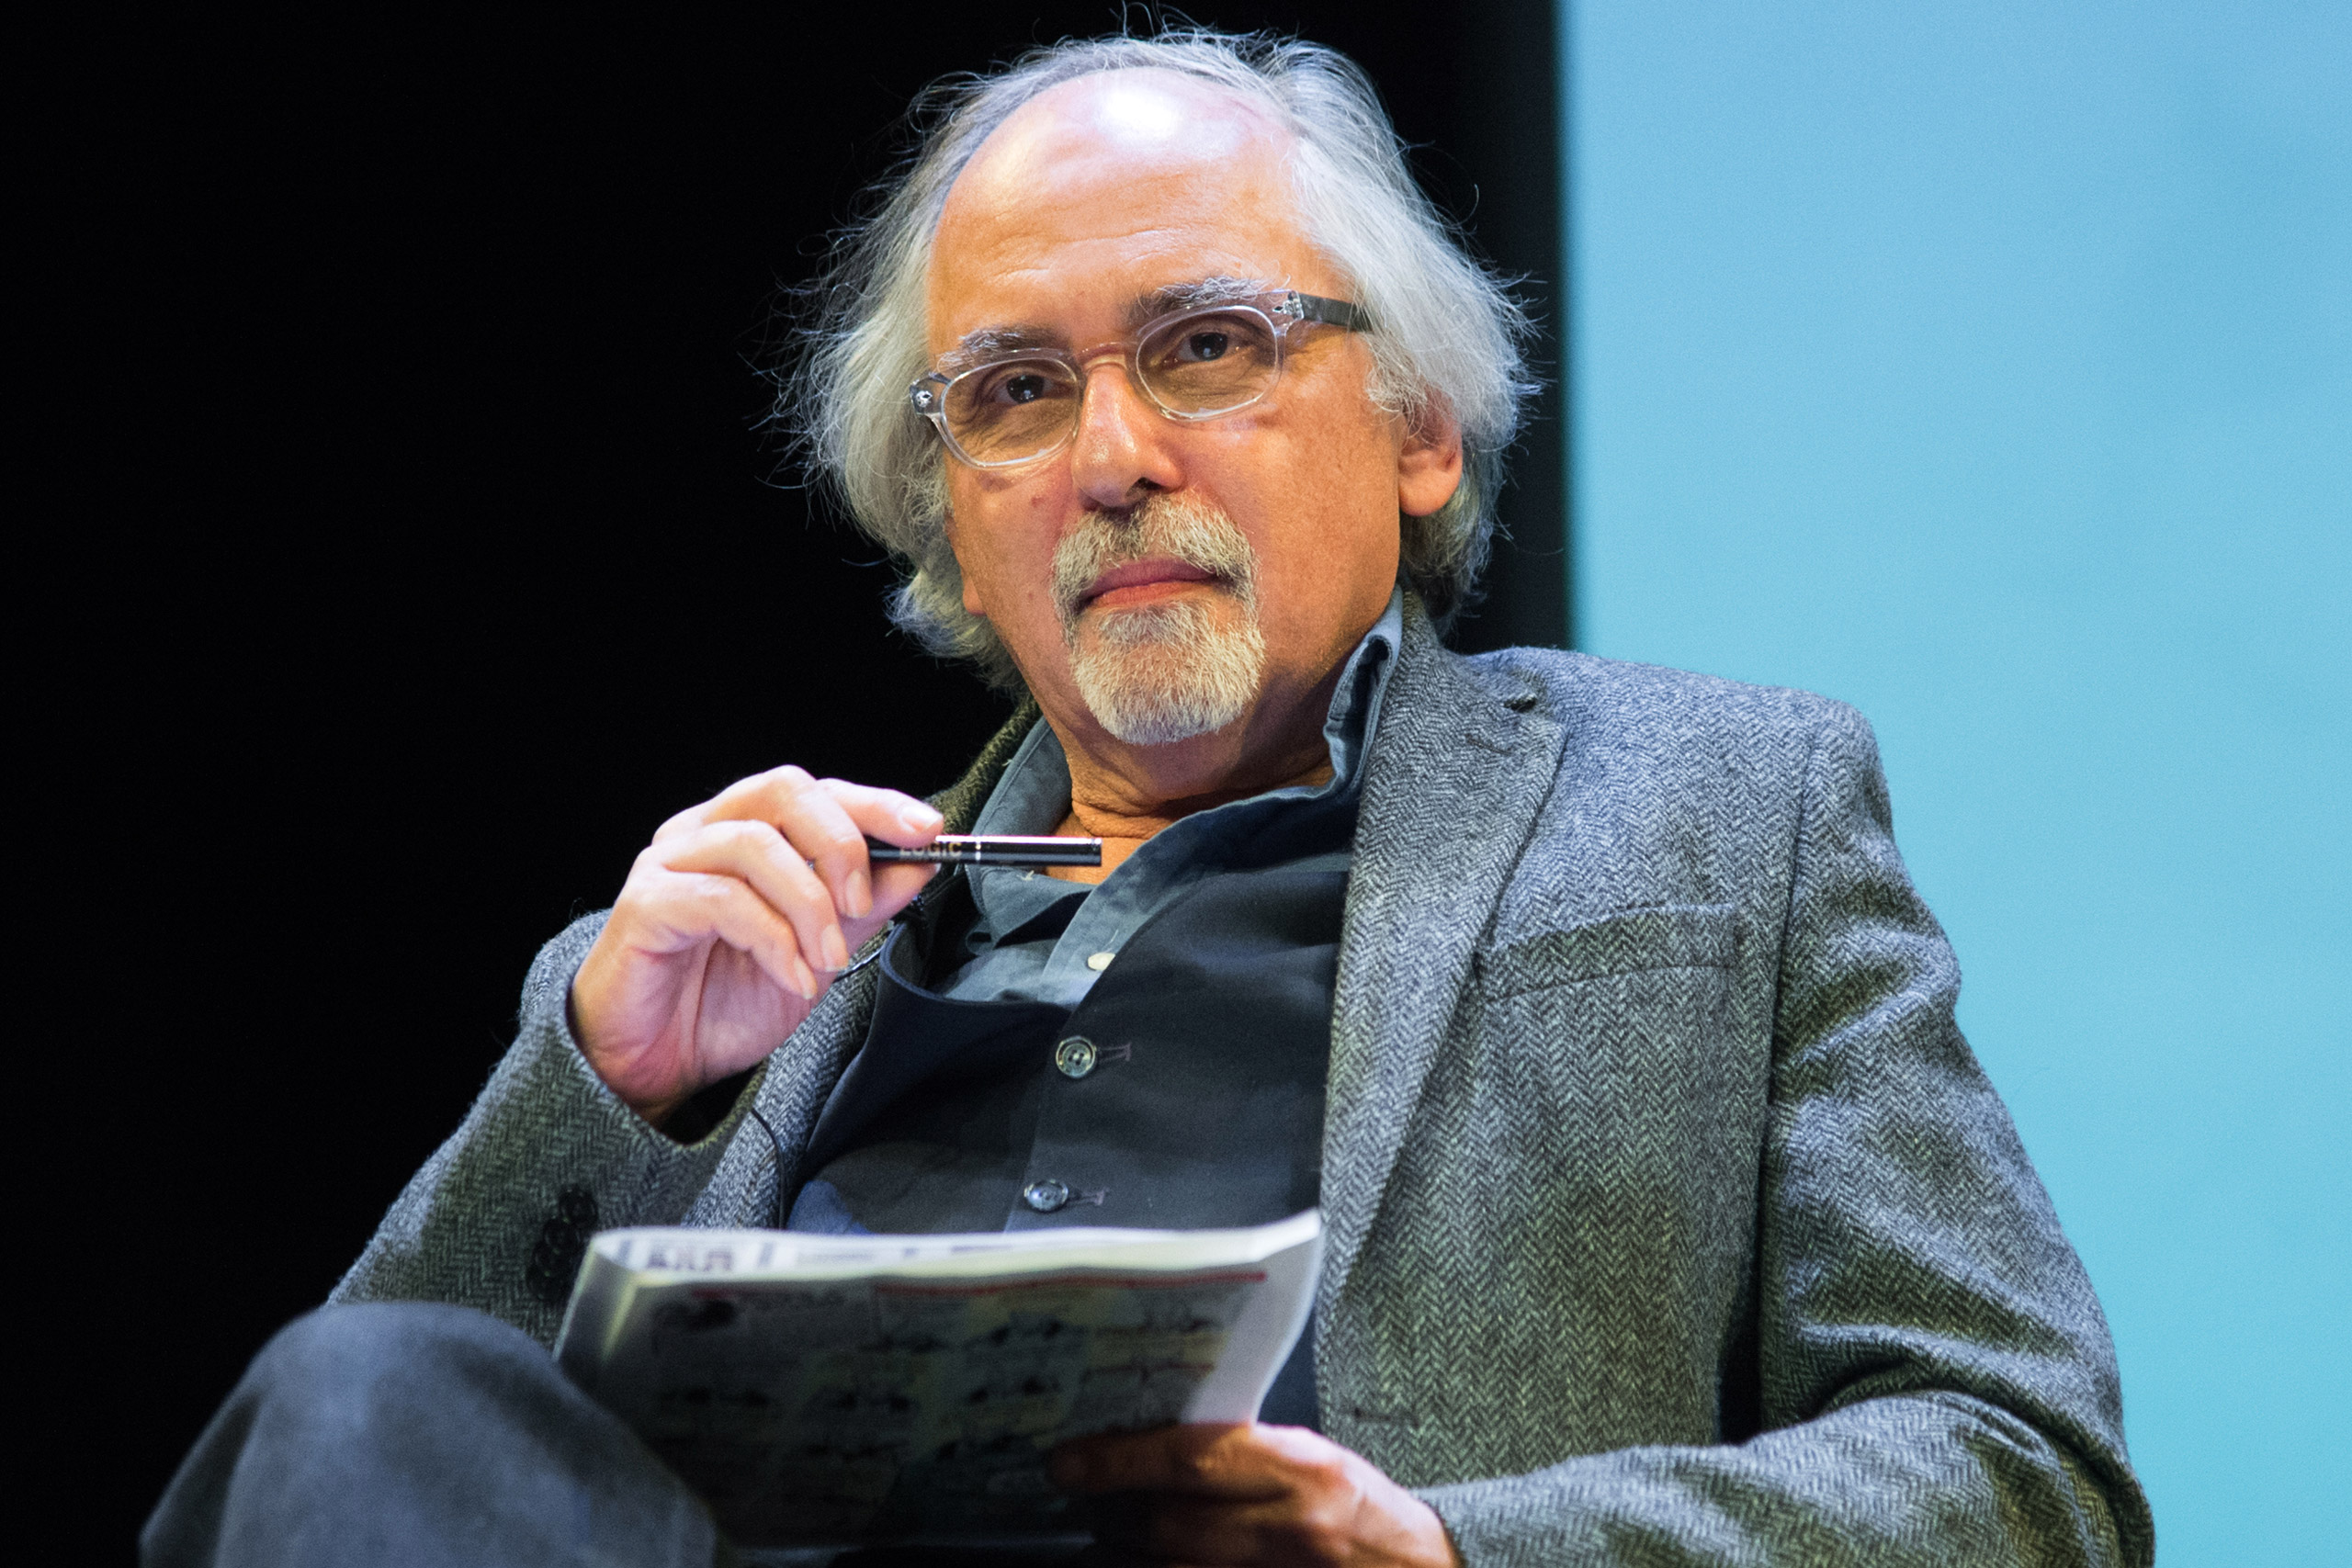 Cartoonist Art Spiegelman attends the French Institute Alliance Francaise's "After Charlie: What's Next for Art, Satire and Censorship" at Florence Gould Hall on Feb. 19, 2015 in New York City. (Mark Sagliocco—Getty Images)